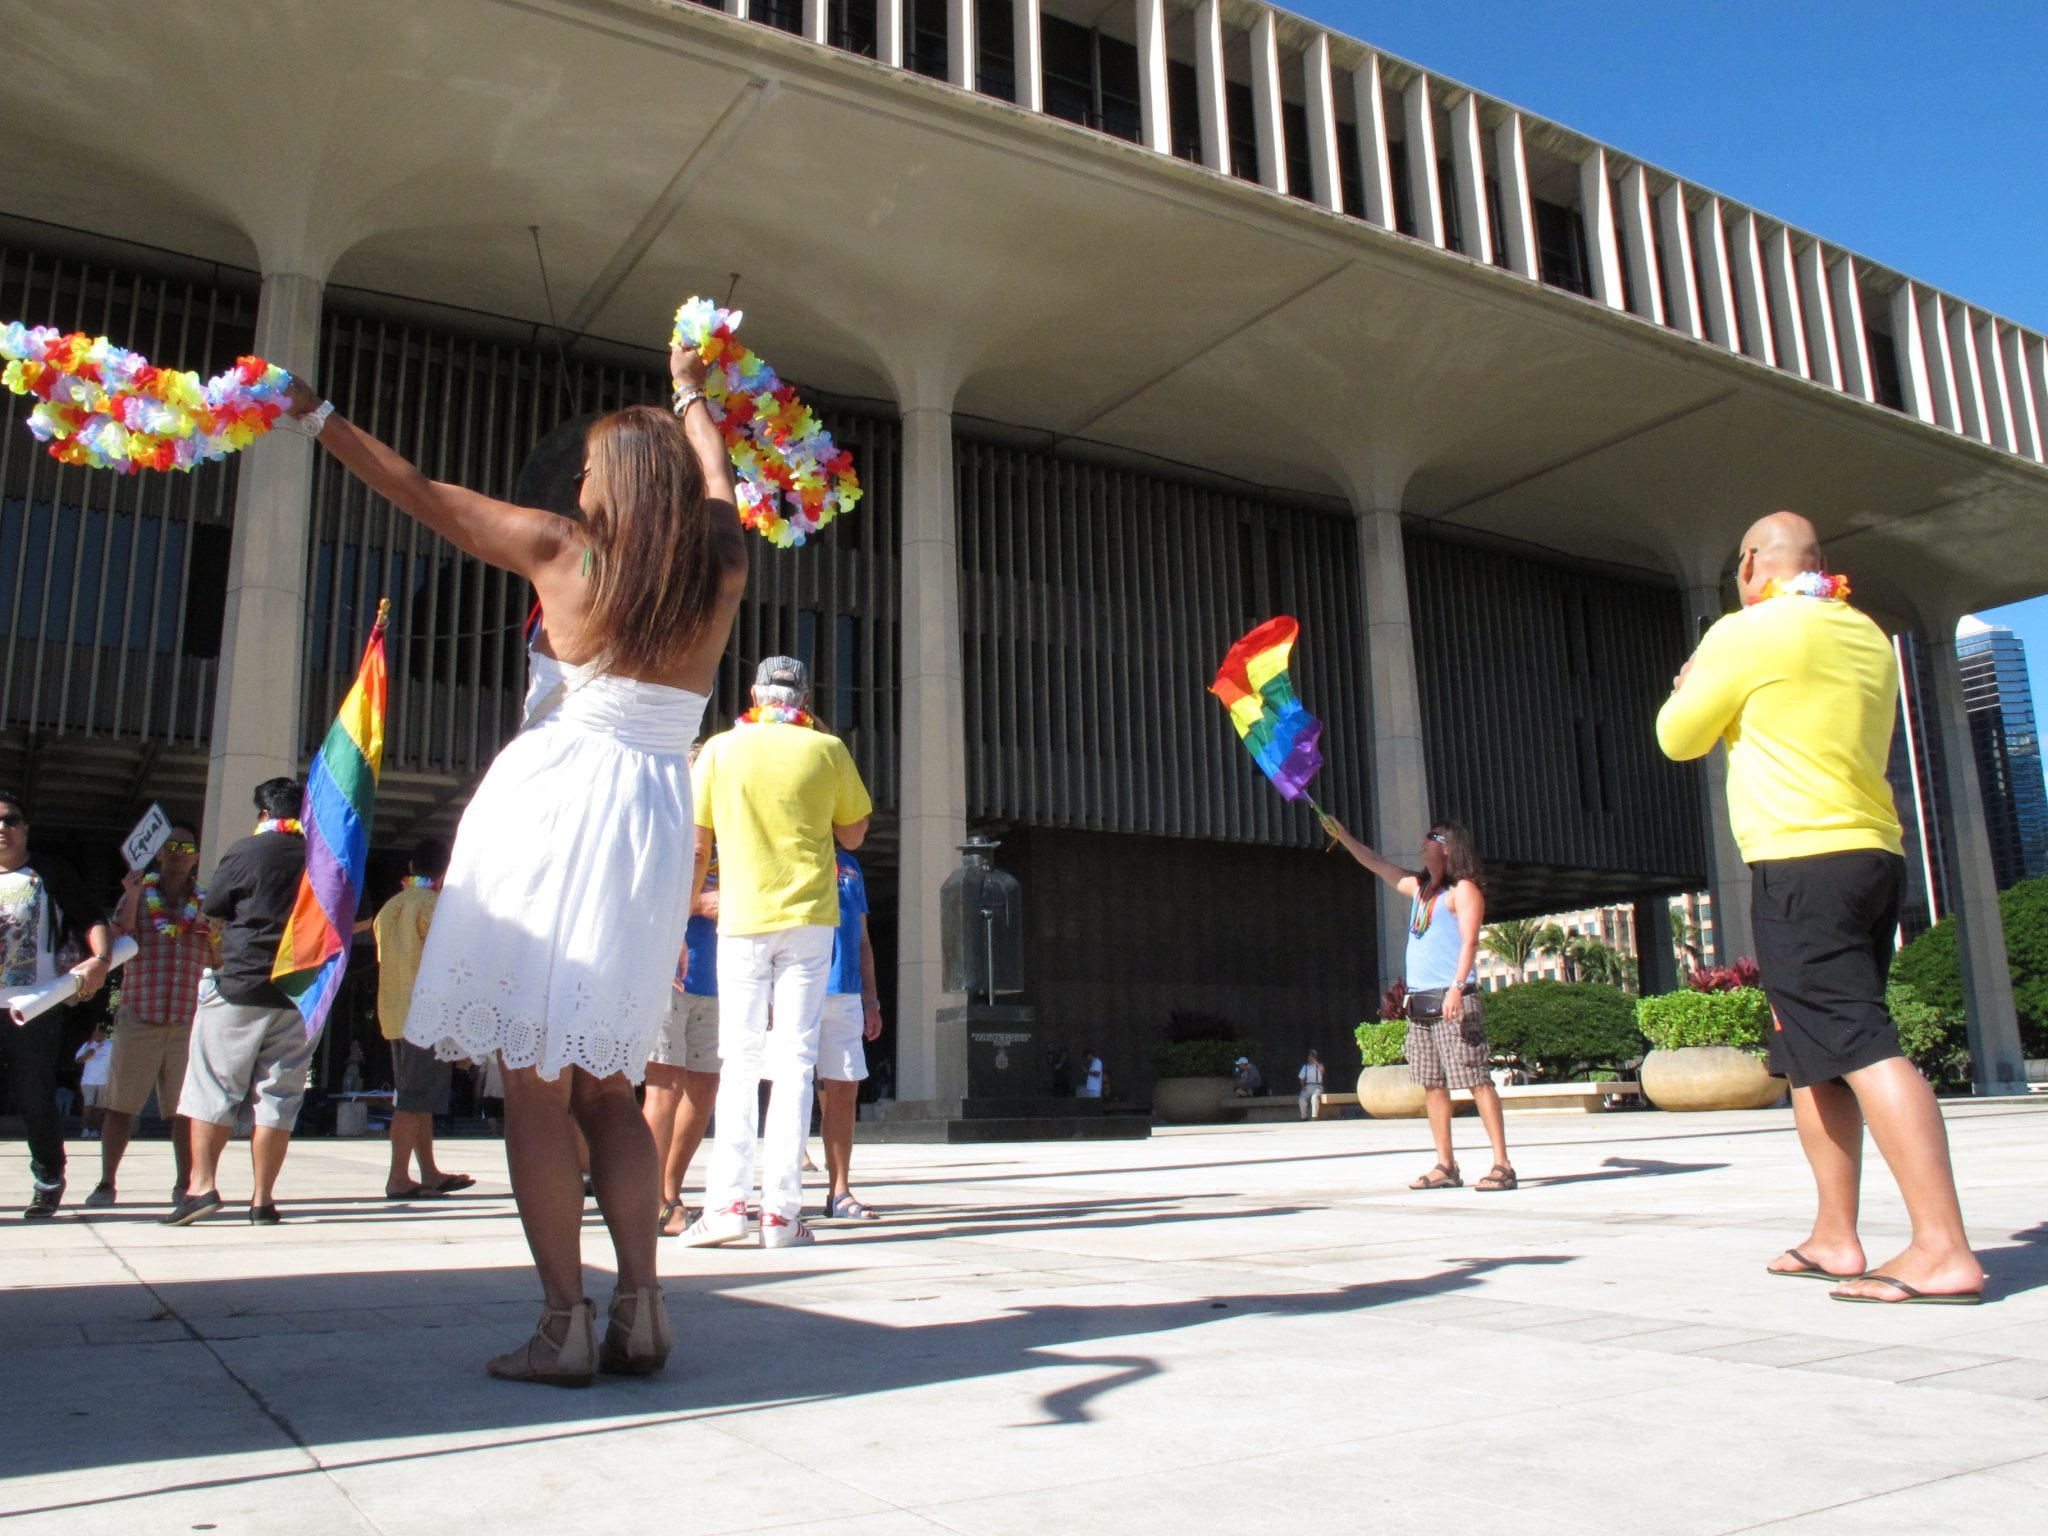 Gay marriage supporters rally outside the Hawaii Capitol in Honolulu ahead of a Senate vote on whether to legalize same-sex marriage on Tuesday, Nov. 12, 2013.